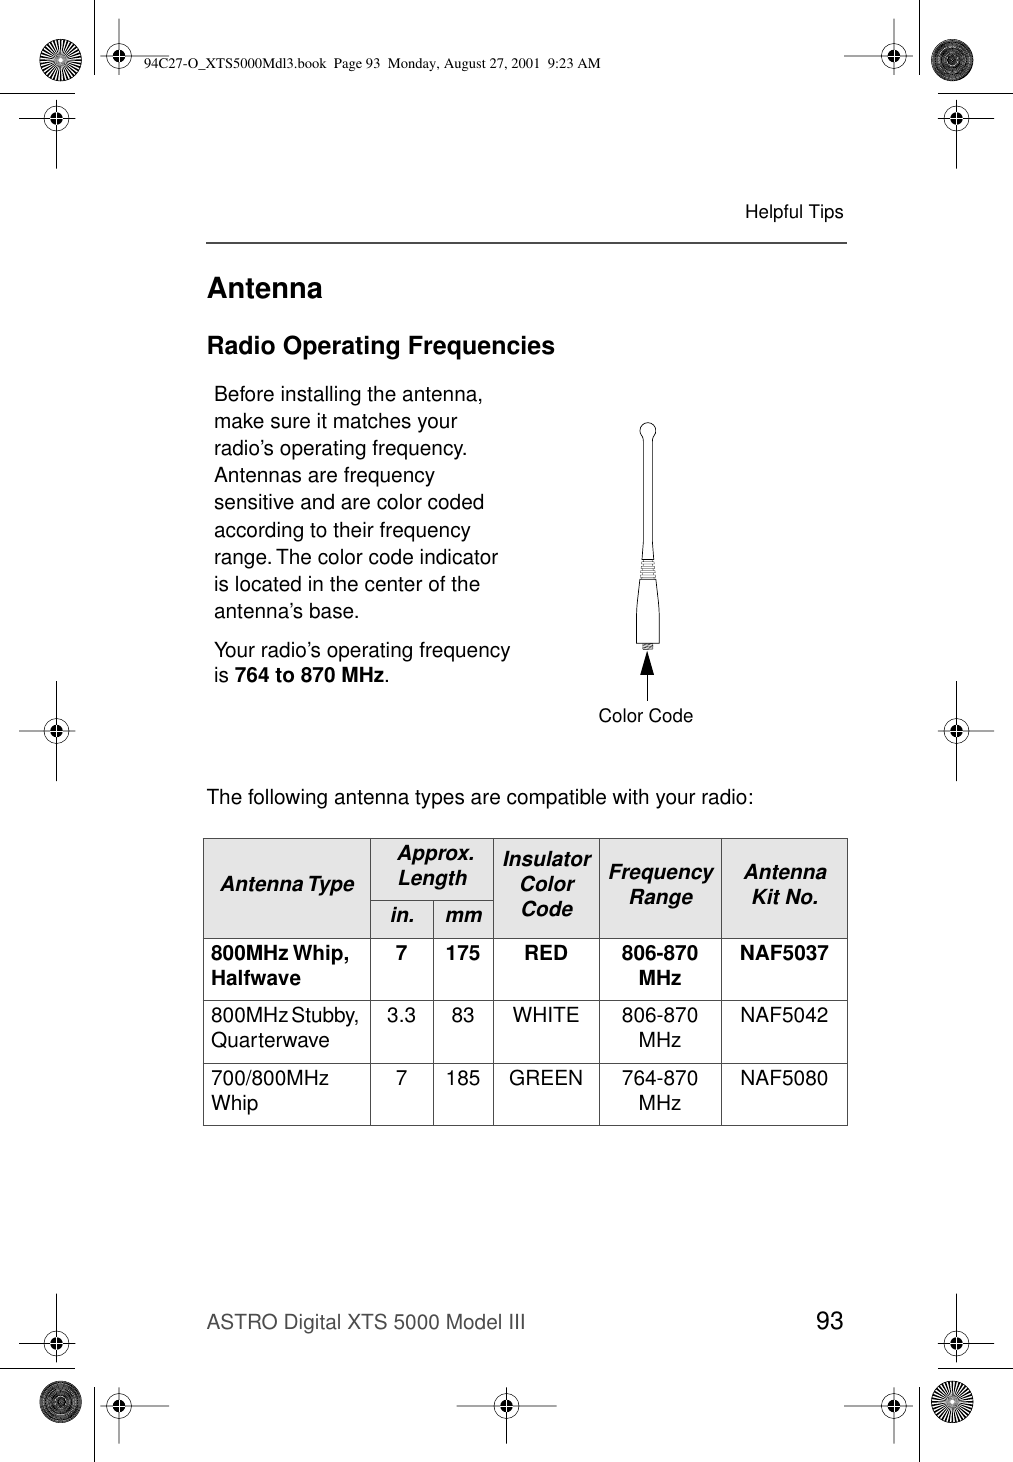 ASTRO Digital XTS 5000 Model III 93Helpful TipsAntennaRadio Operating FrequenciesThe following antenna types are compatible with your radio:Before installing the antenna, make sure it matches your radio’s operating frequency. Antennas are frequency sensitive and are color coded according to their frequency range. The color code indicator is located in the center of the antenna’s base.Your radio’s operating frequency is 764 to 870 MHz.Antenna Type Approx. Length Insulator ColorCodeFrequency Range Antenna Kit No.in. mm800MHz Whip,Halfwave 7 175 RED 806-870 MHz NAF5037800MHz Stubby, Quarterwave 3.3 83 WHITE 806-870 MHz NAF5042700/800MHz Whip 7 185 GREEN 764-870 MHz NAF5080MAEPF-23262-OUHFHelicalUHF800 MHzWhip800 MHzStubbyColor Code94C27-O_XTS5000Mdl3.book  Page 93  Monday, August 27, 2001  9:23 AM